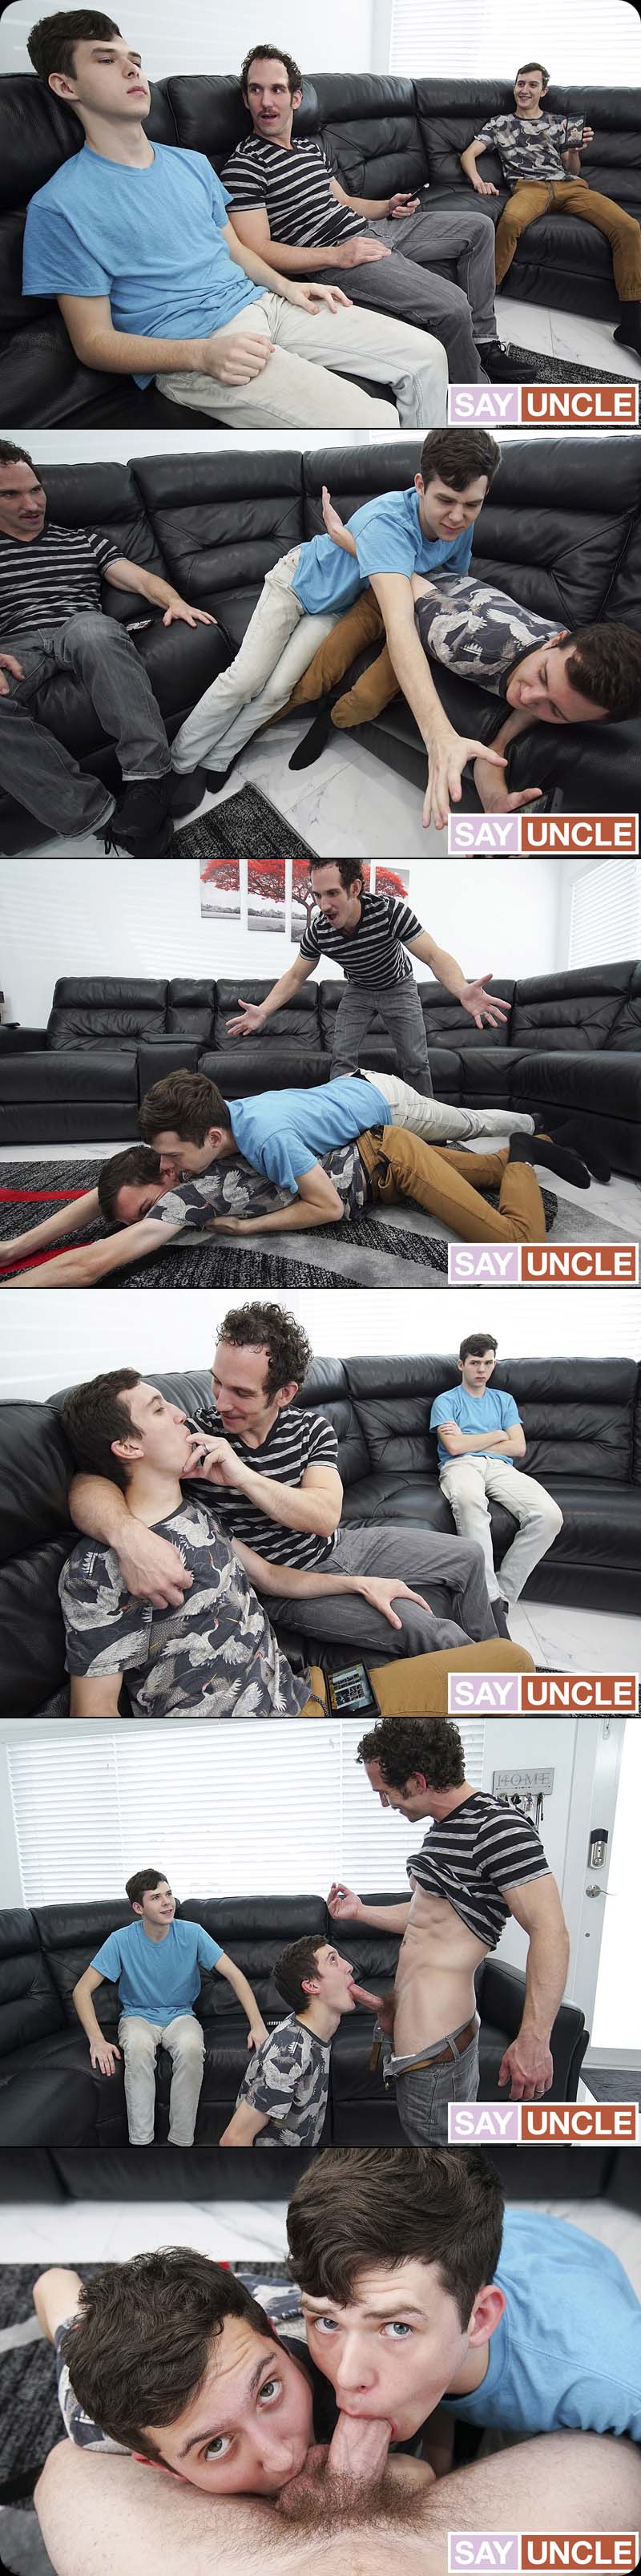 Uncle Greg Holds Down The Fort Ch 3: The Jealous Nephew (Dakota Lovell, Greg McKeon and Jack Andram) at FamilyDick